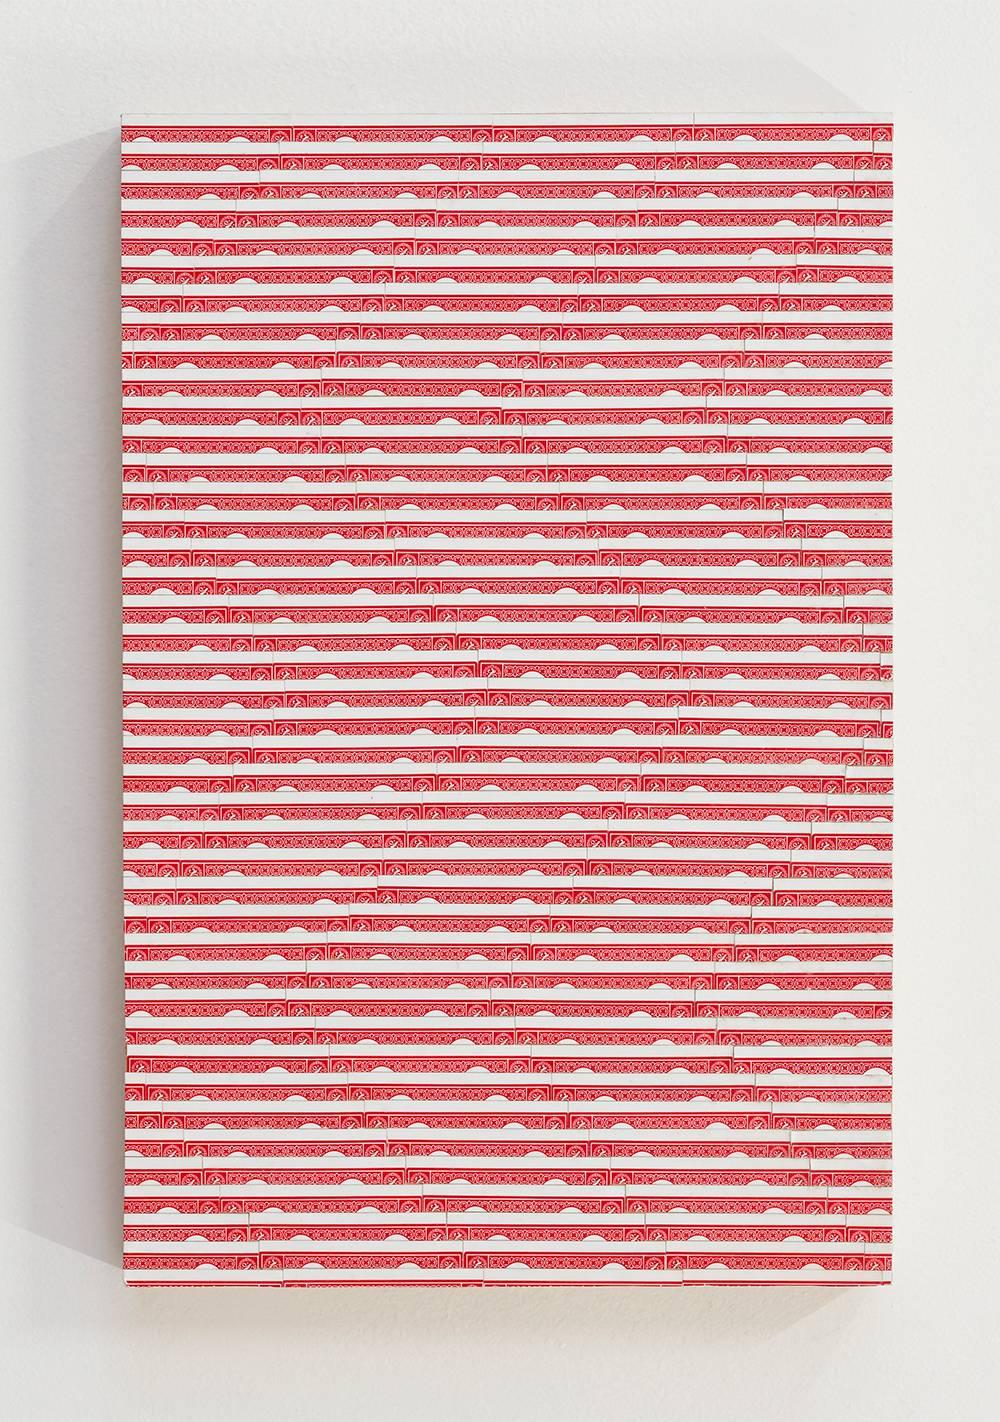 live for tomorrow, 2017
Used playing cards on panel
46 x 30.5 cm / 18 x 12 in

Ghost of a Dream is the collaborative practice of artists Adam Eckstrom and Lauren Was. Eckstrom (b. 1974, Twin Cities, MN) received an MFA in Painting in 2005 and Was